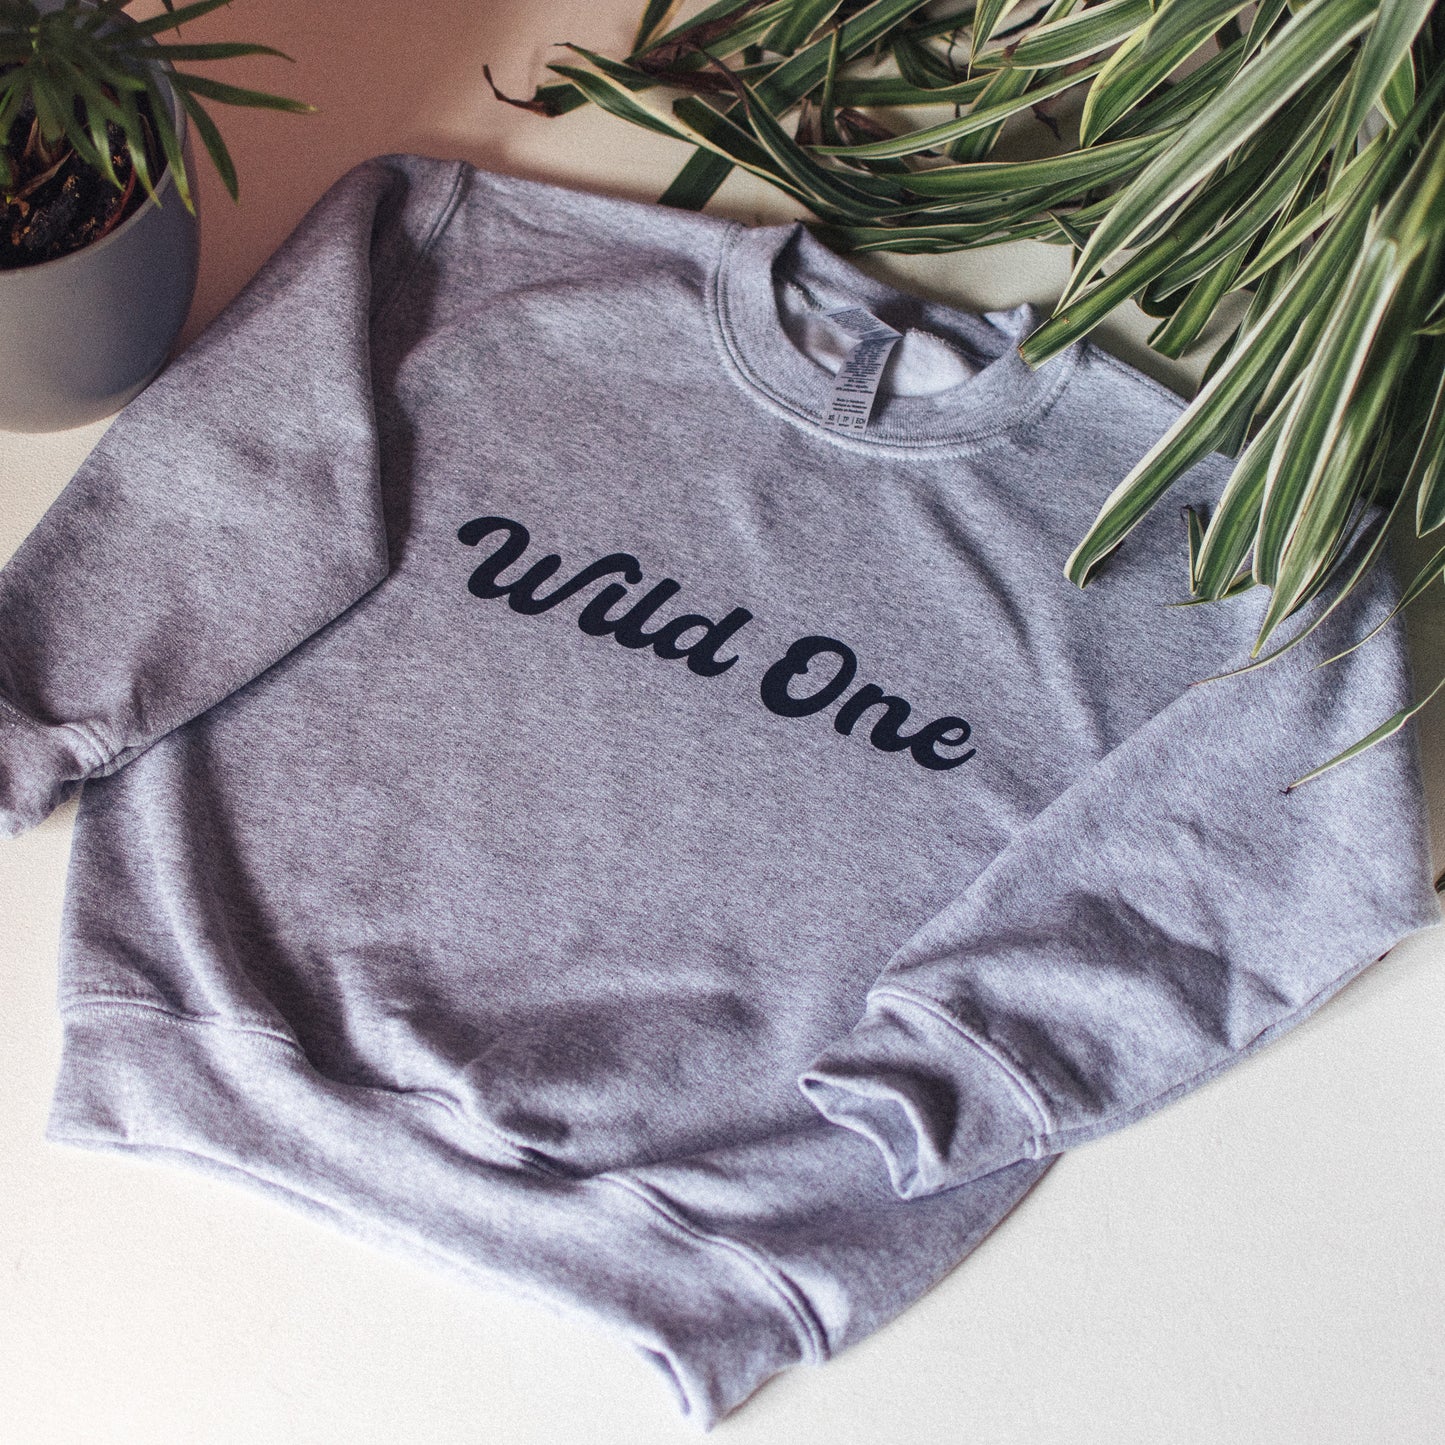 Wild One Grey Kids Sweatshirt for all ages